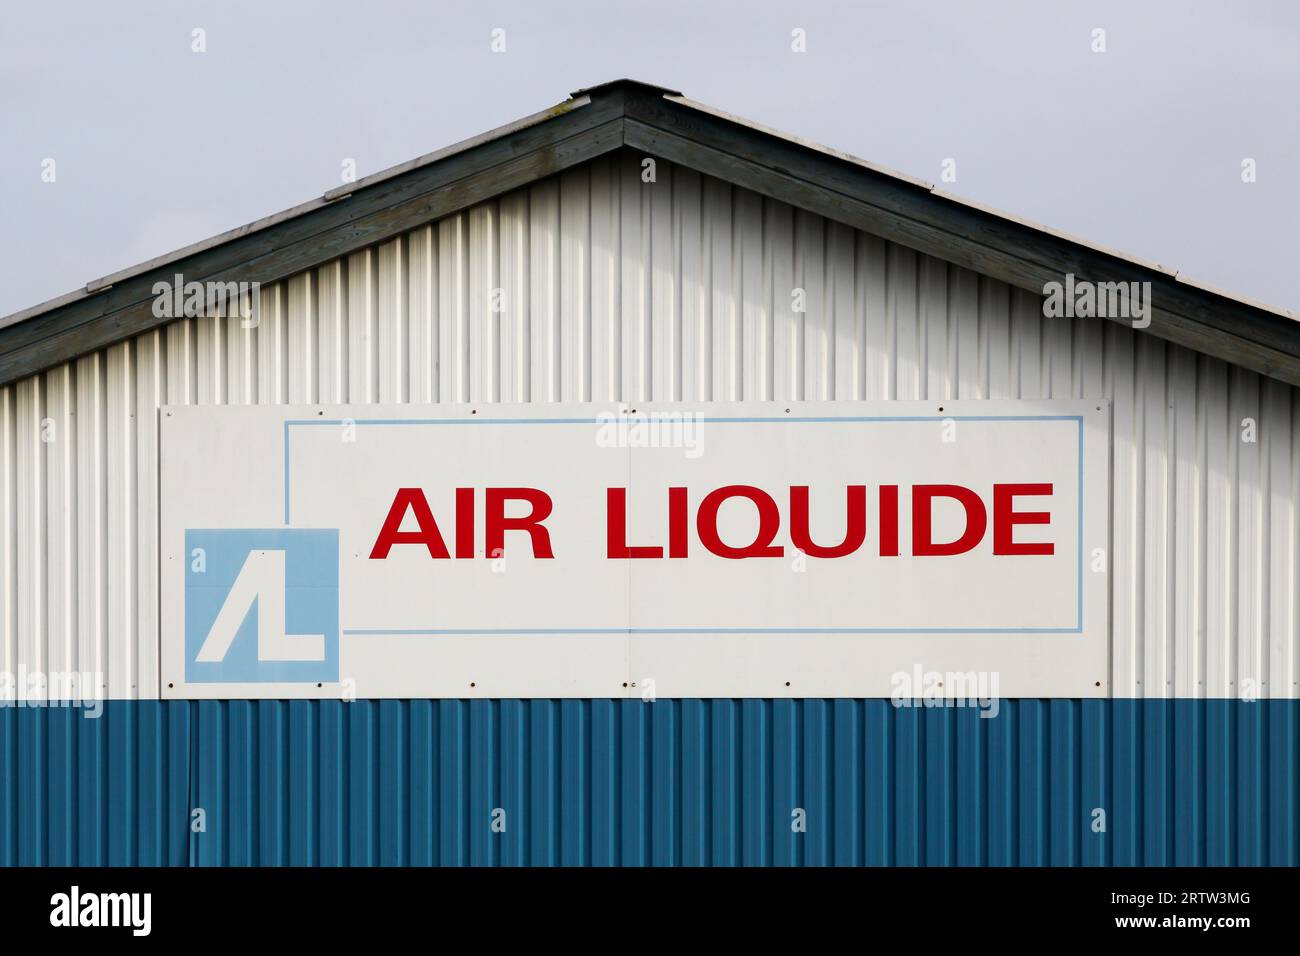 Air Liquide logo on a wall. Air Liquide is a French multinational company which supplies industrial gases and services to various industries Stock Photo